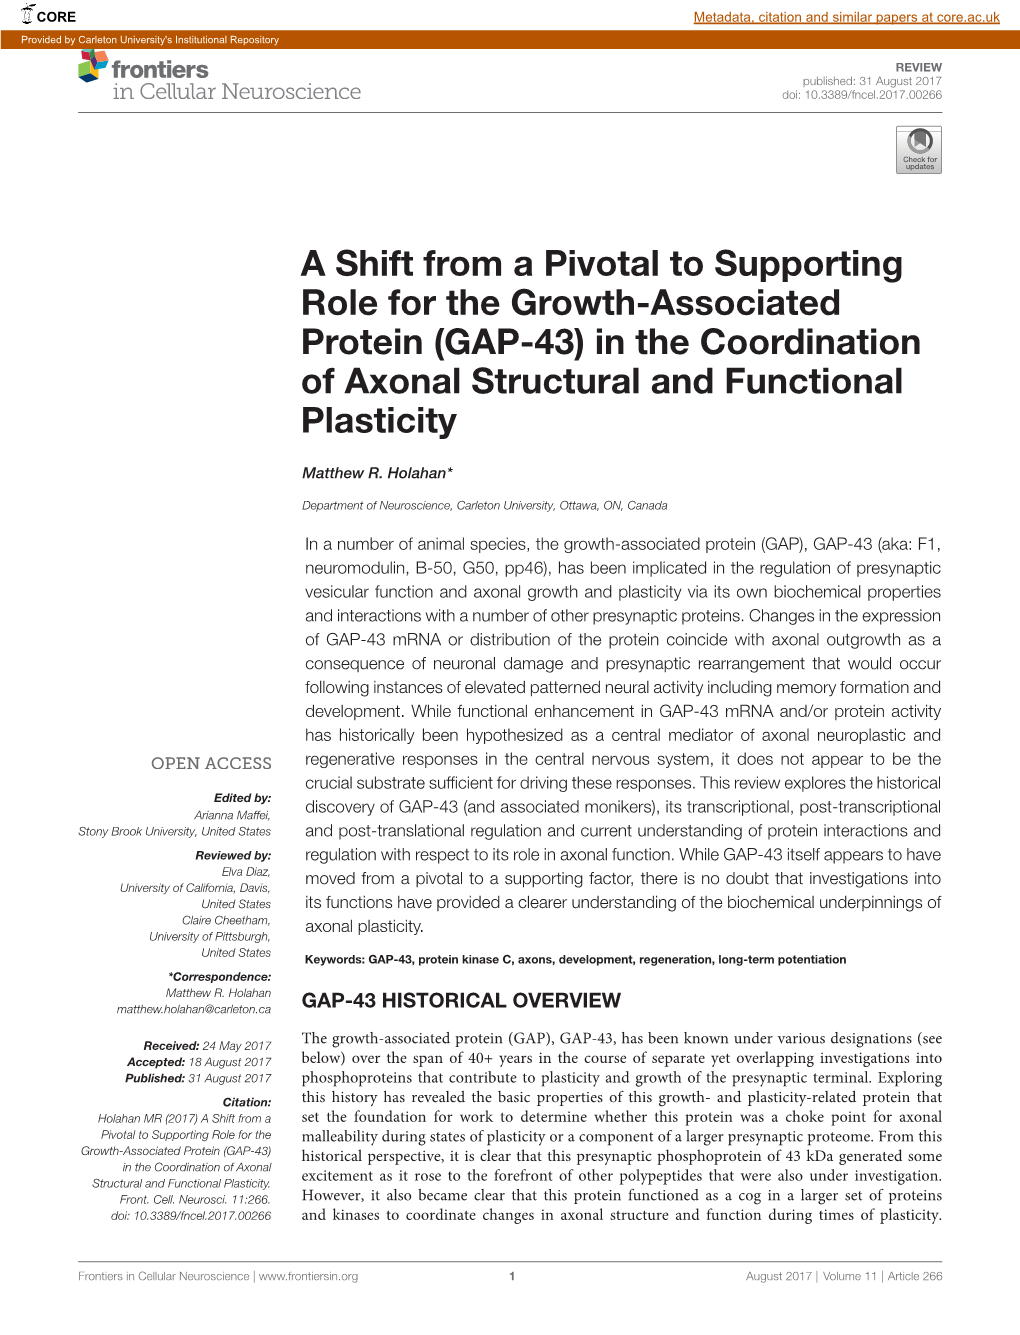 (GAP-43) in the Coordination of Axonal Structural and Functional Plasticity